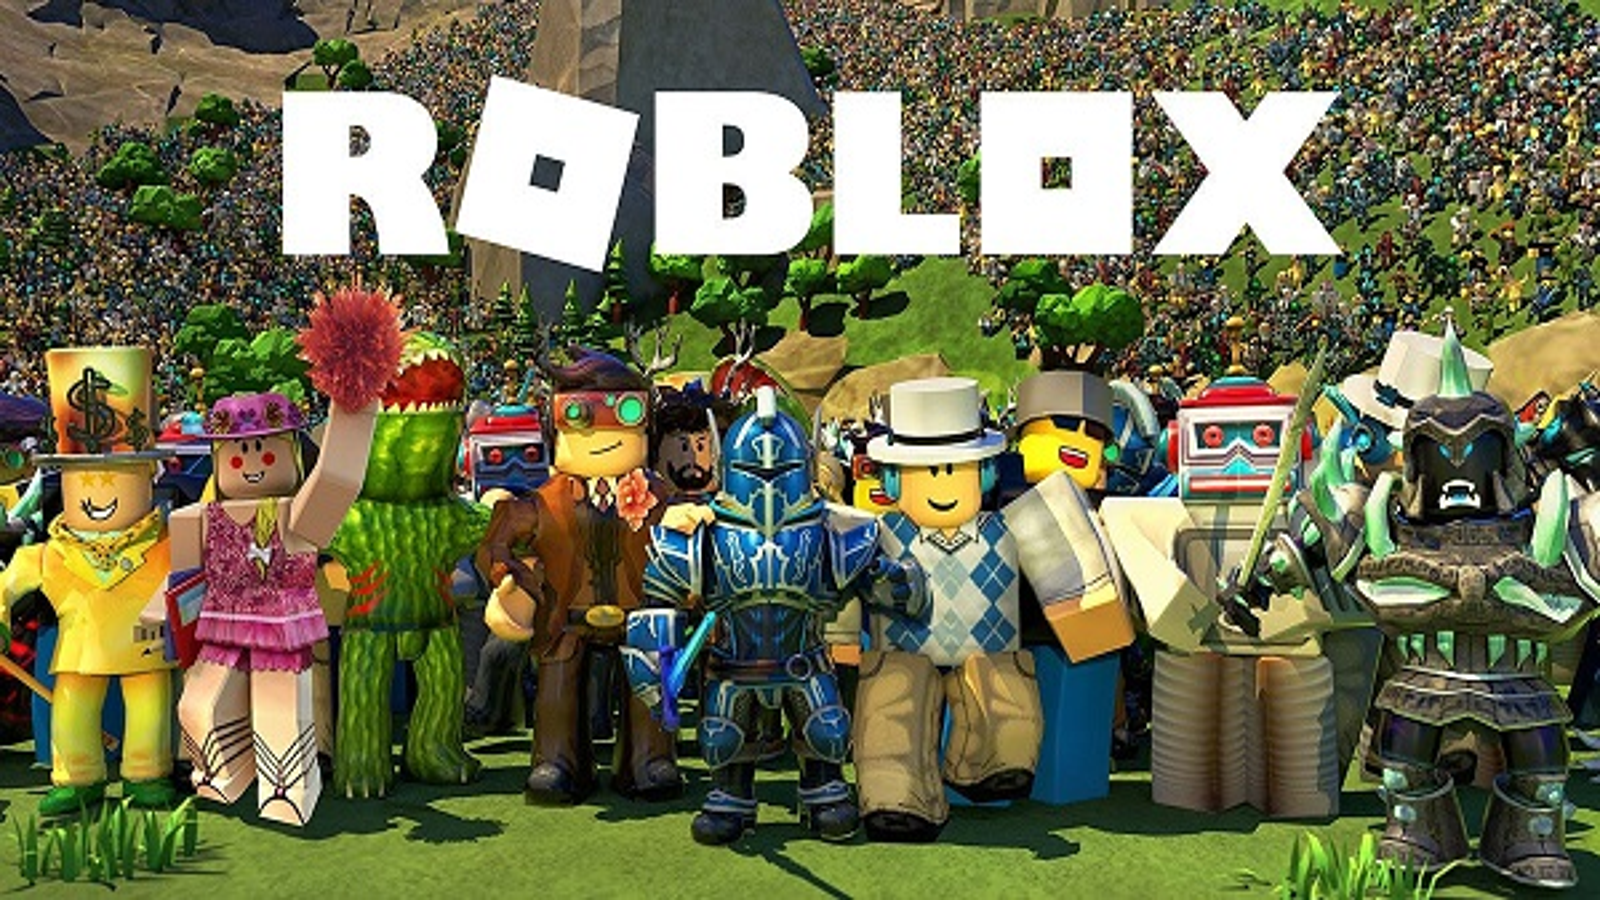 On Roblox, children are both grunt labor and target consumers of a video  game giant